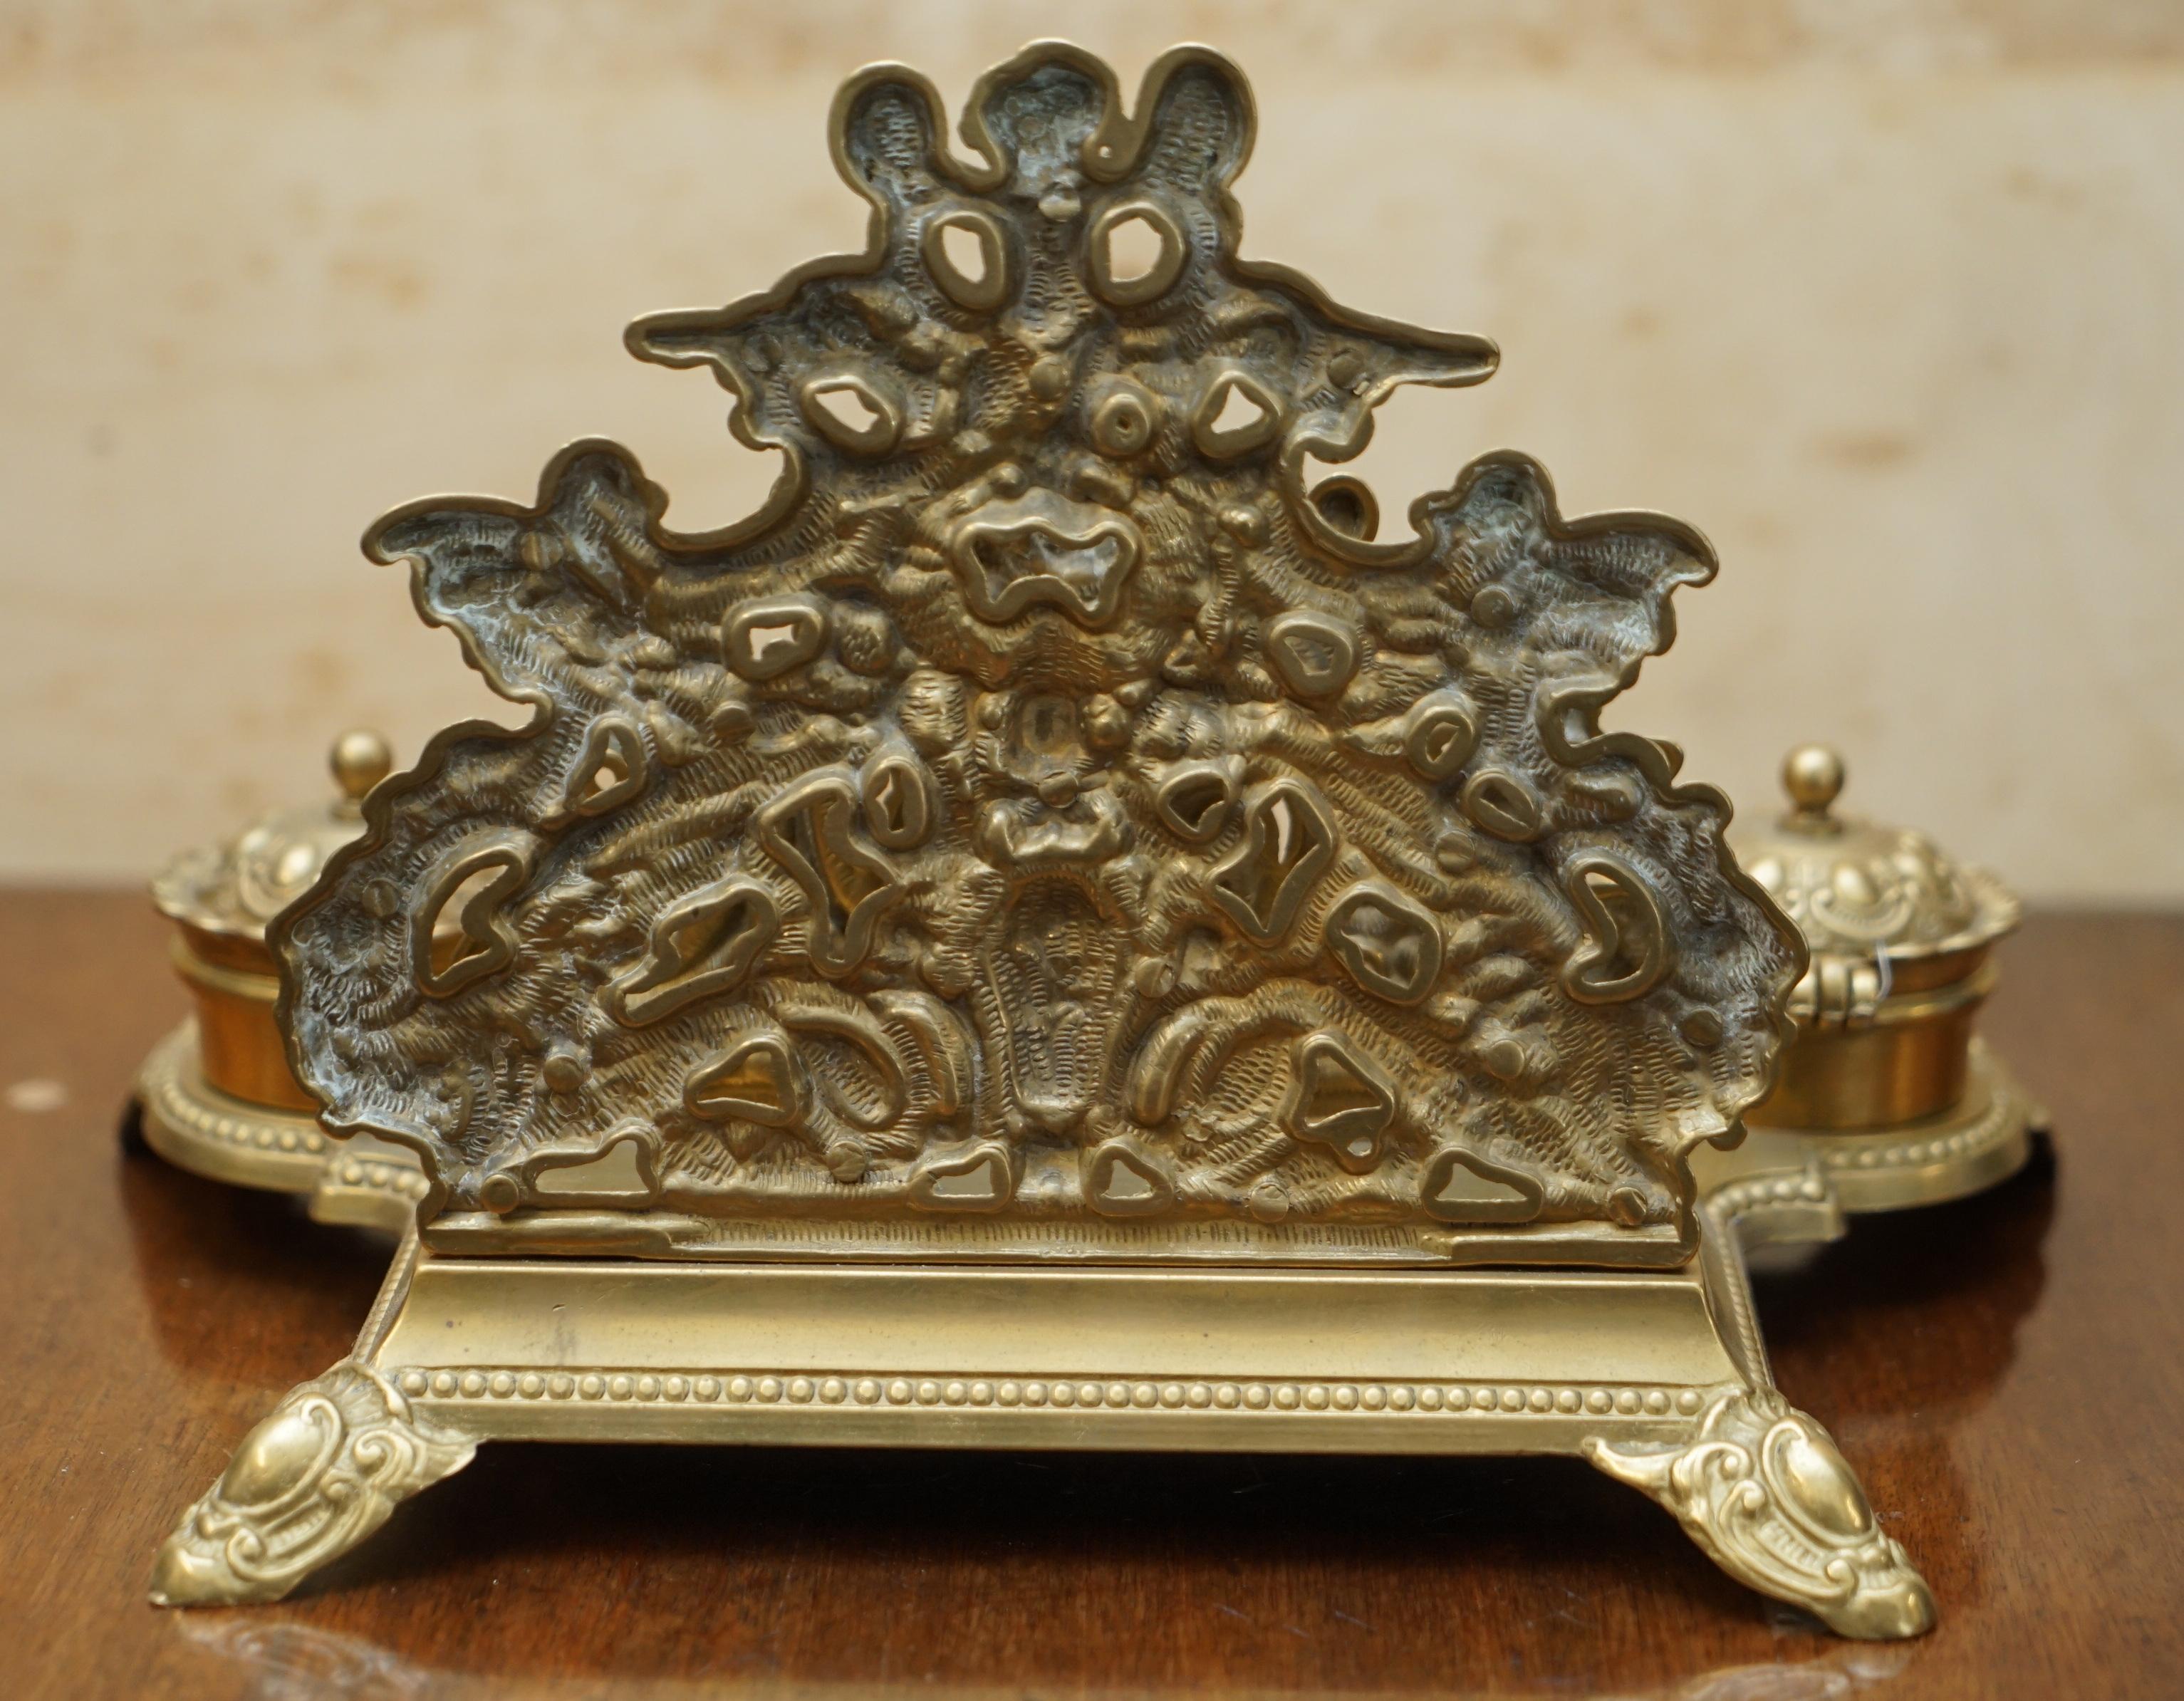 LOVELY ANTIQUE FRENCH BAROQUE REPOUSSE GiLT BRASS CHERUB INKWELL LETTER STAND im Angebot 7